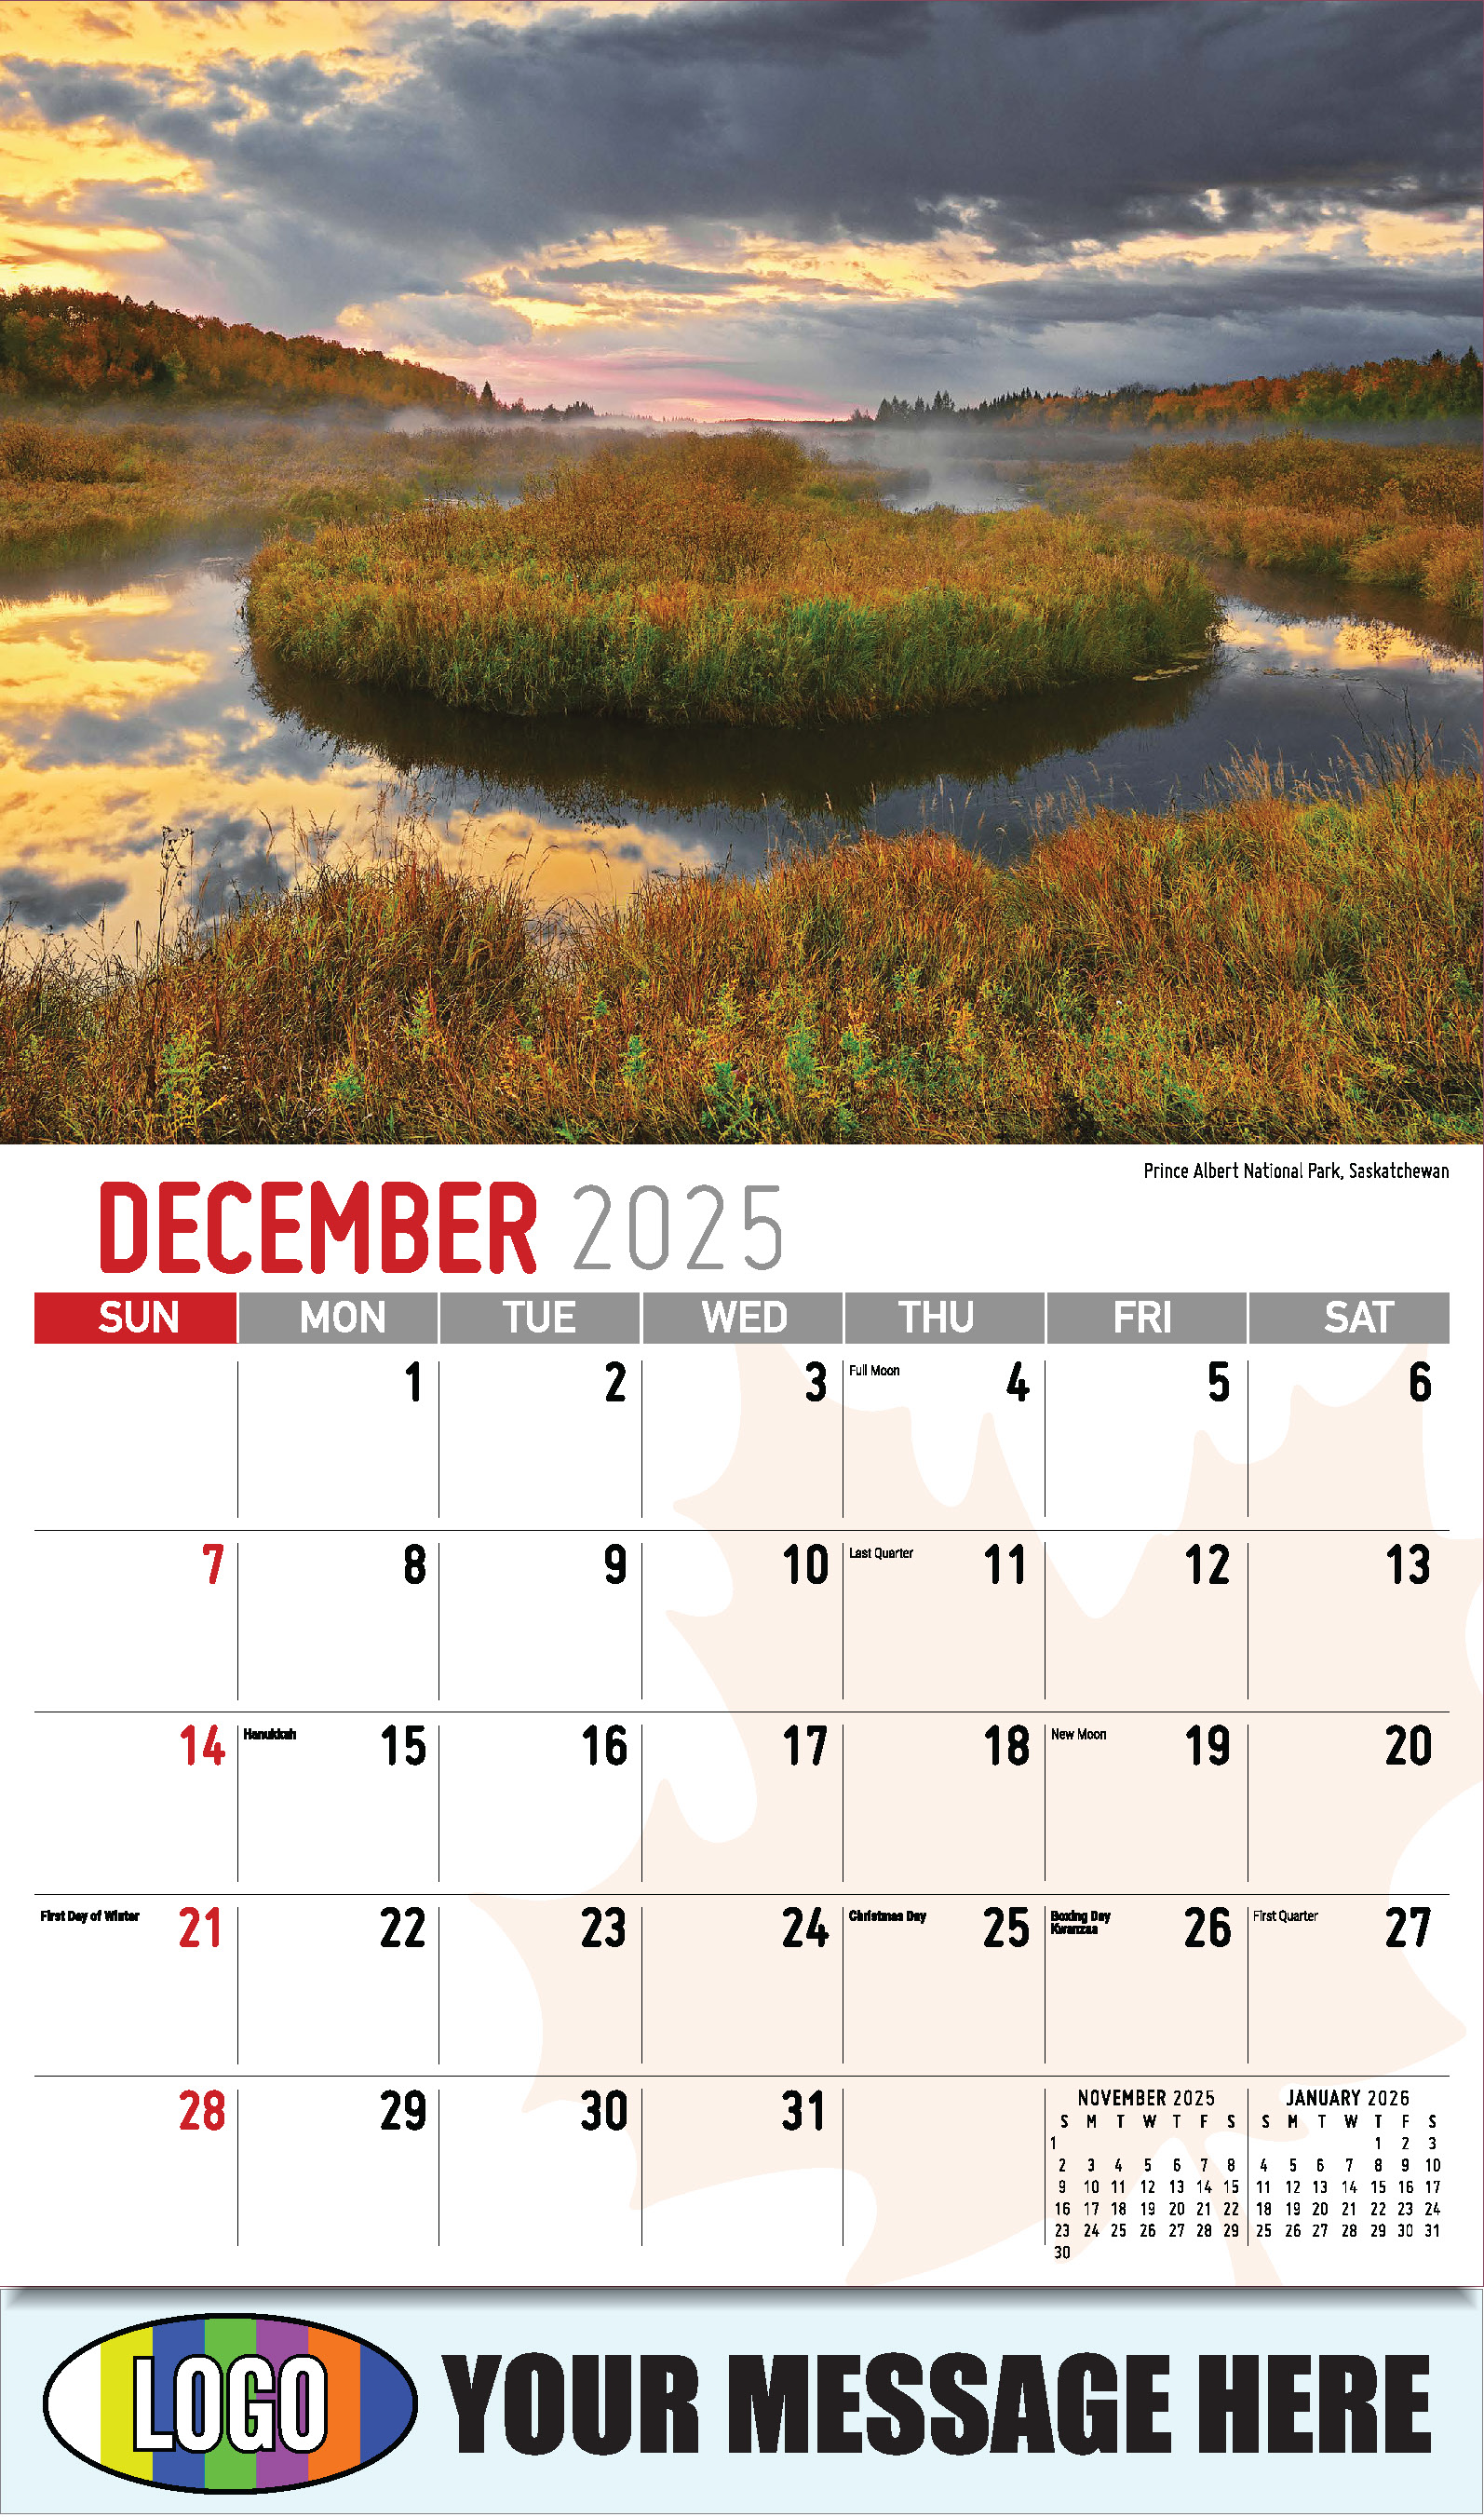 Scenes of Canada 2025 Business Promotion Wall Calendar - December